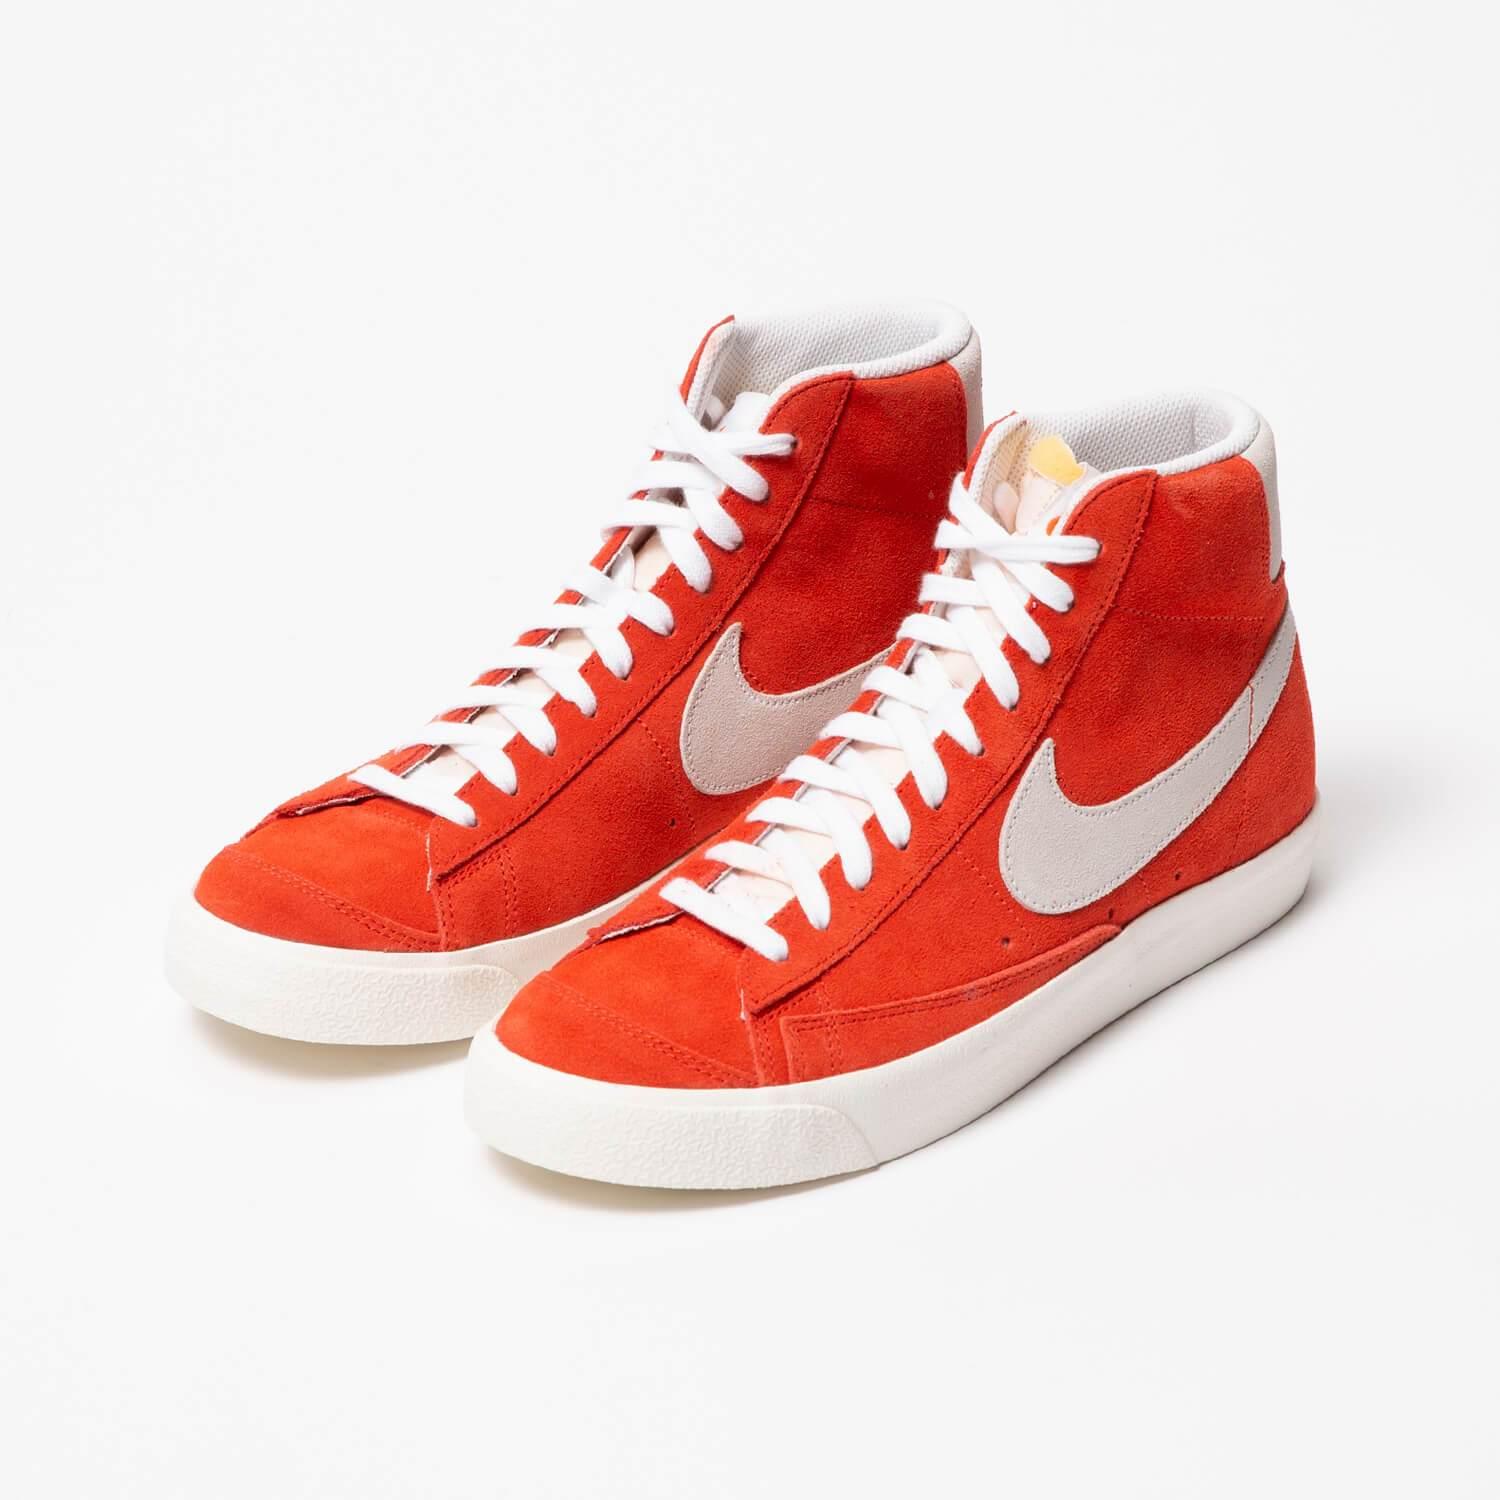 Nike Blazer Mid '77 Suede in Red for Men - Lyst